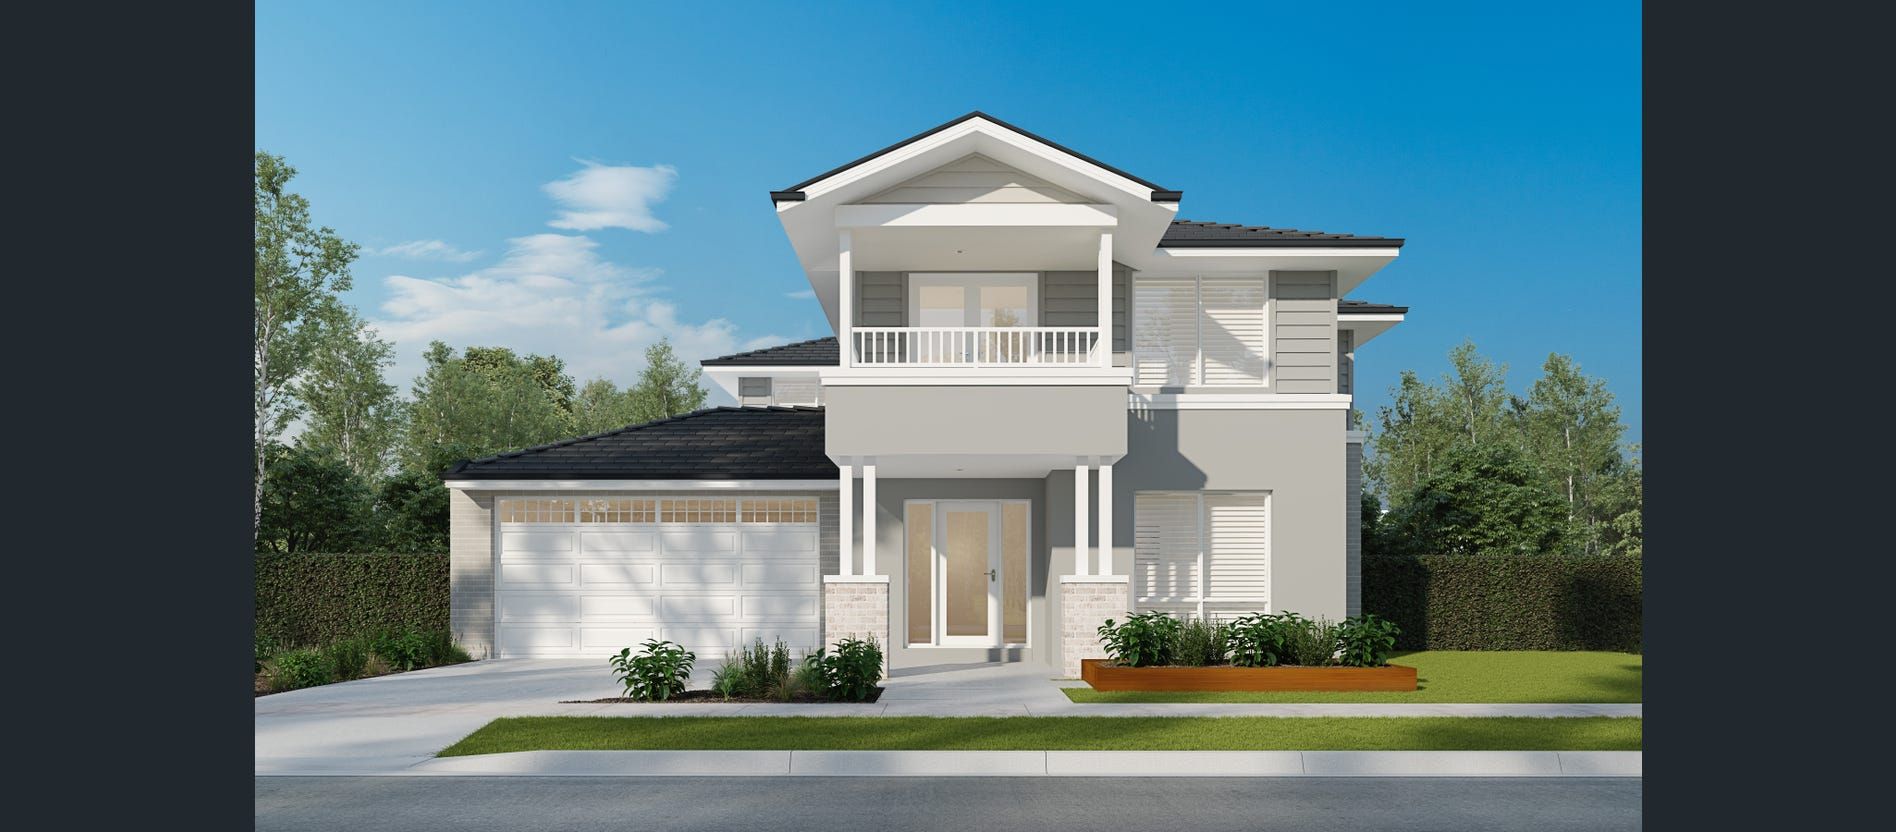 4 bedrooms New House & Land in  ROUSE HILL NSW, 2155